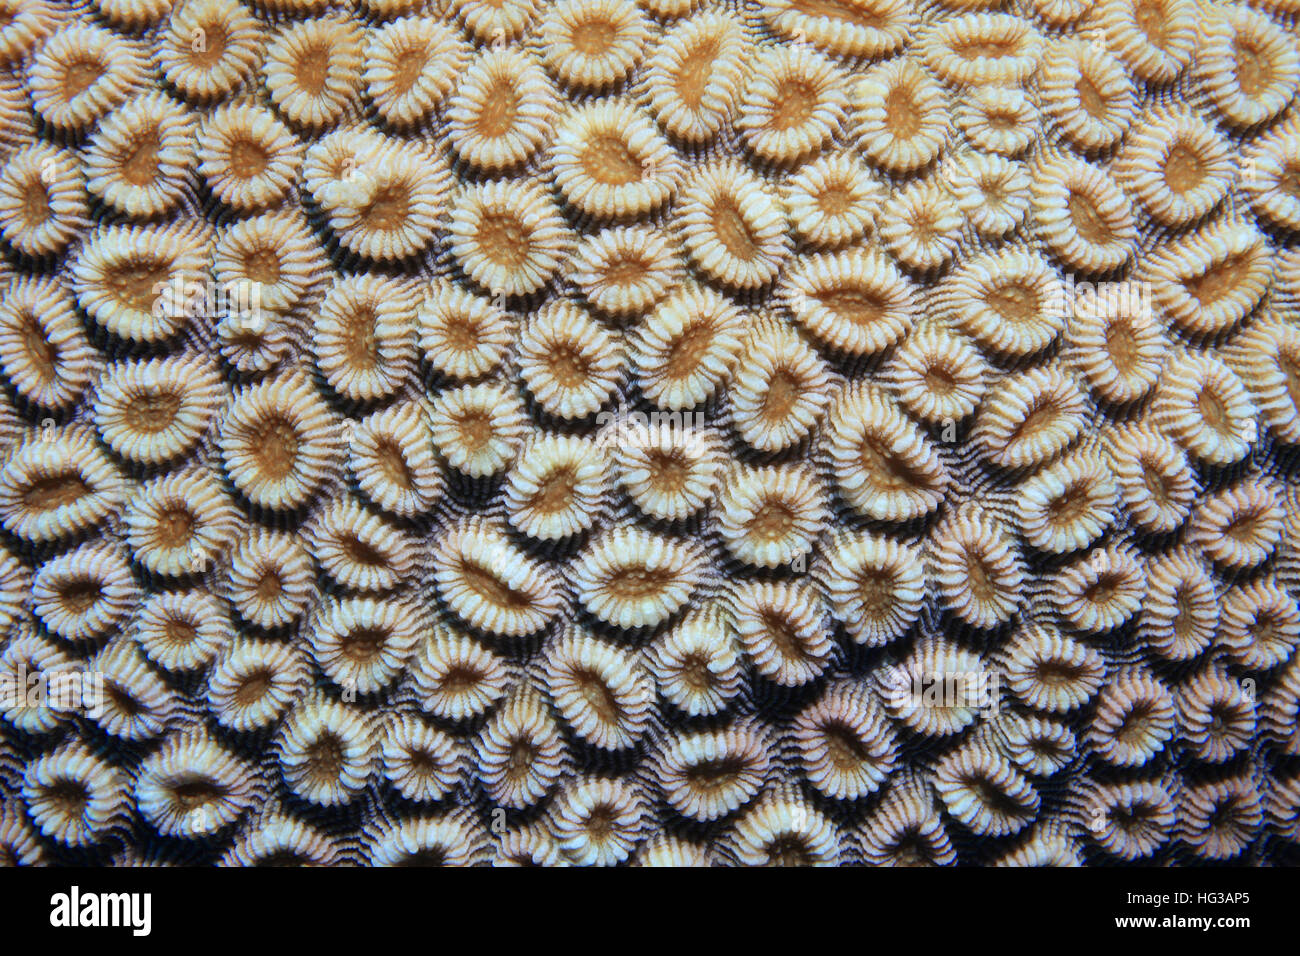 Coral polyps of brain coral (Favia favus) underwater in the coral reef Stock Photo